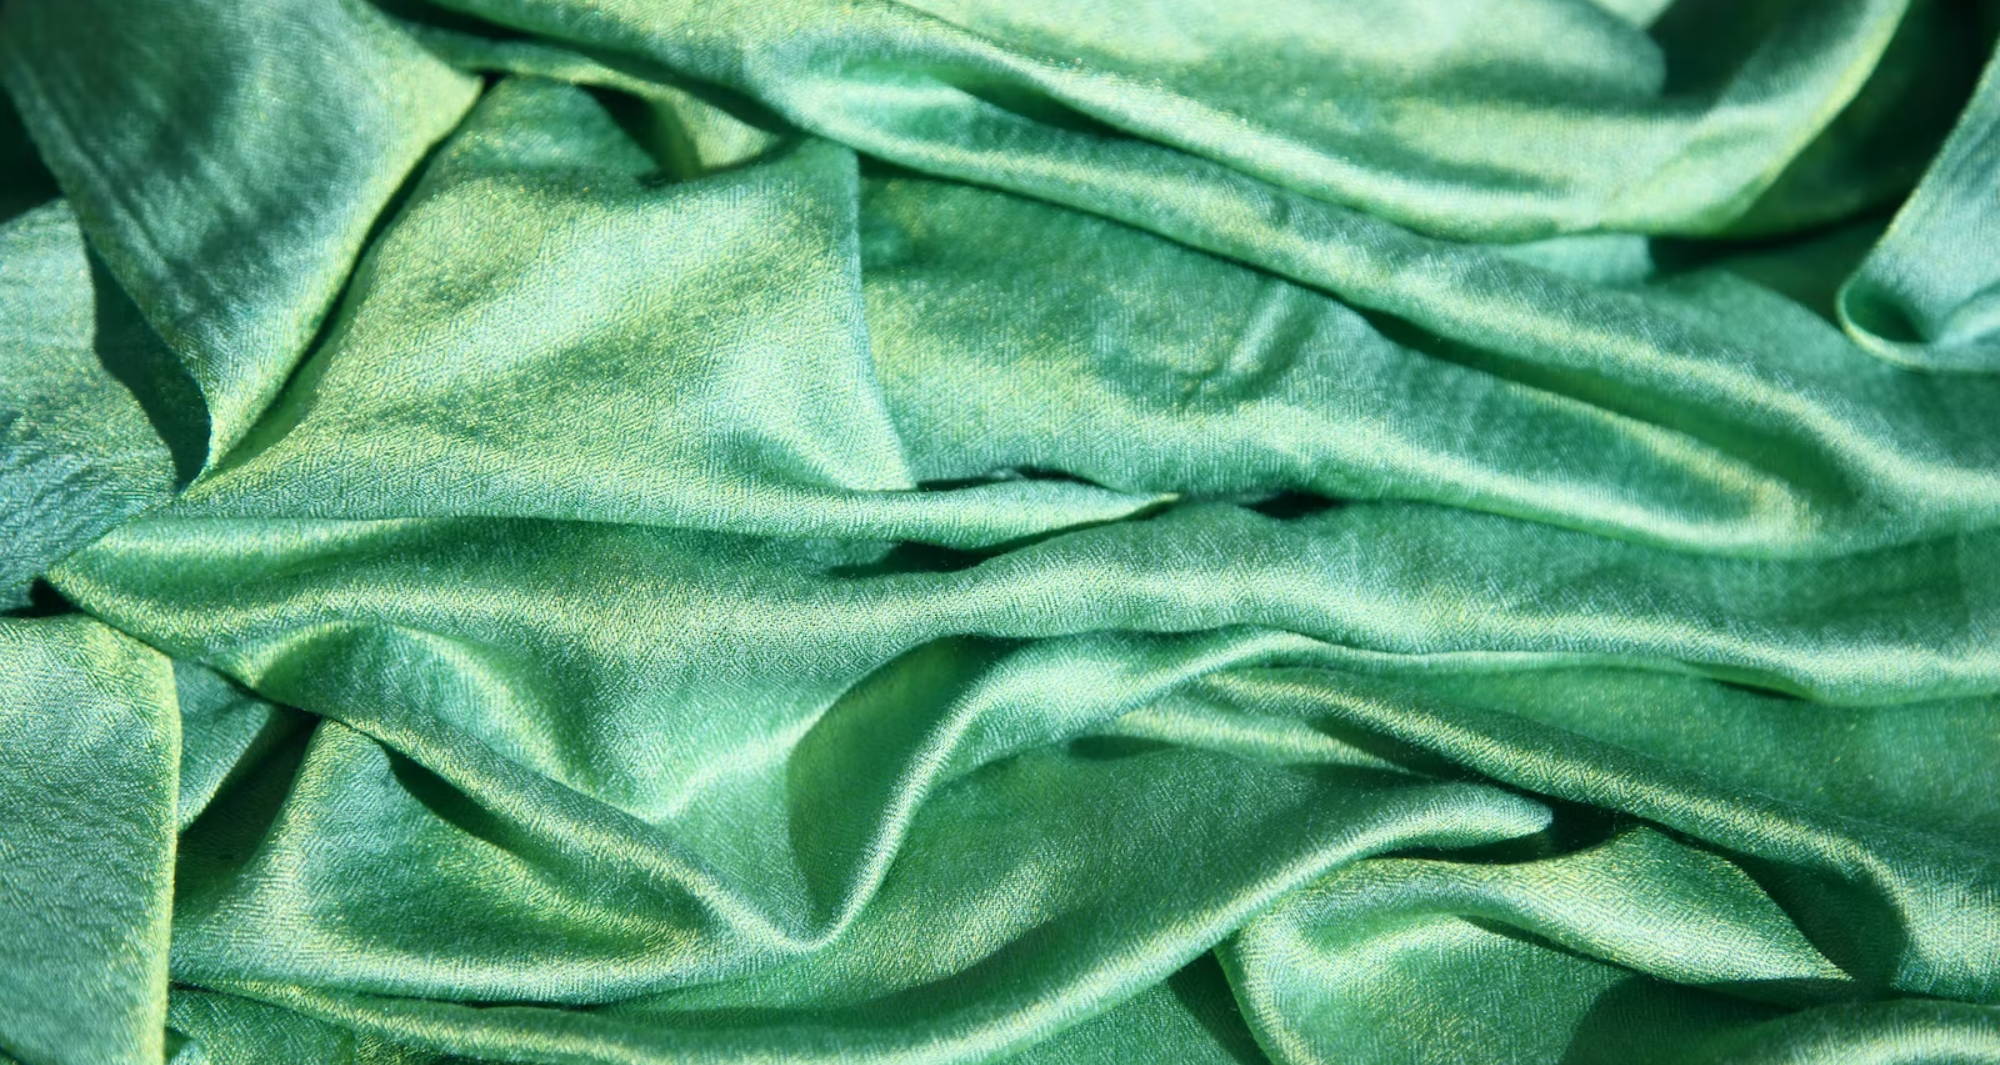 slightly bunched up green silky fabric 